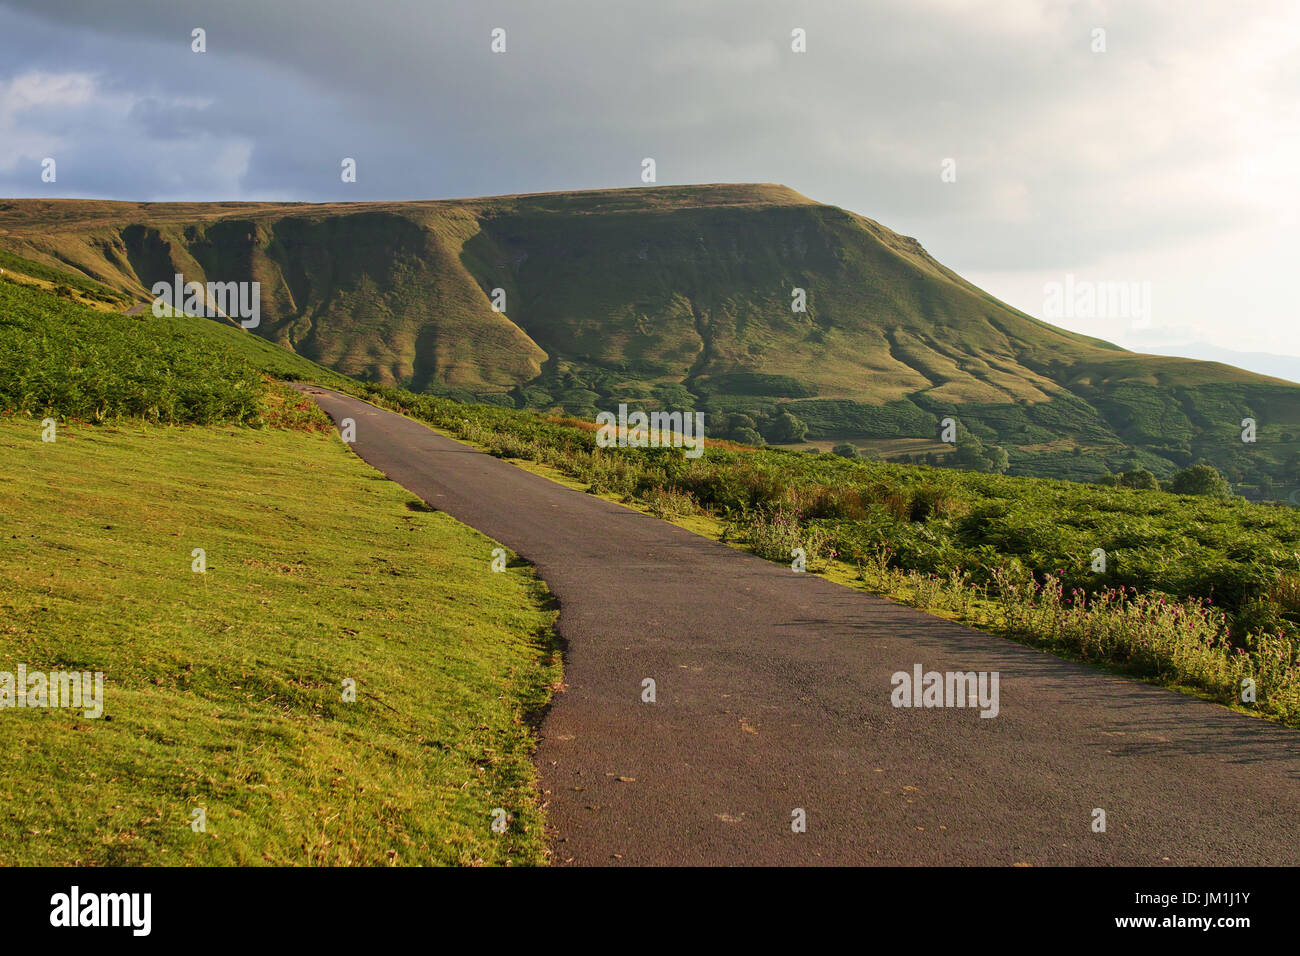 Hay bluff, Brecon Beacons, Powys, Wales Banque D'Images